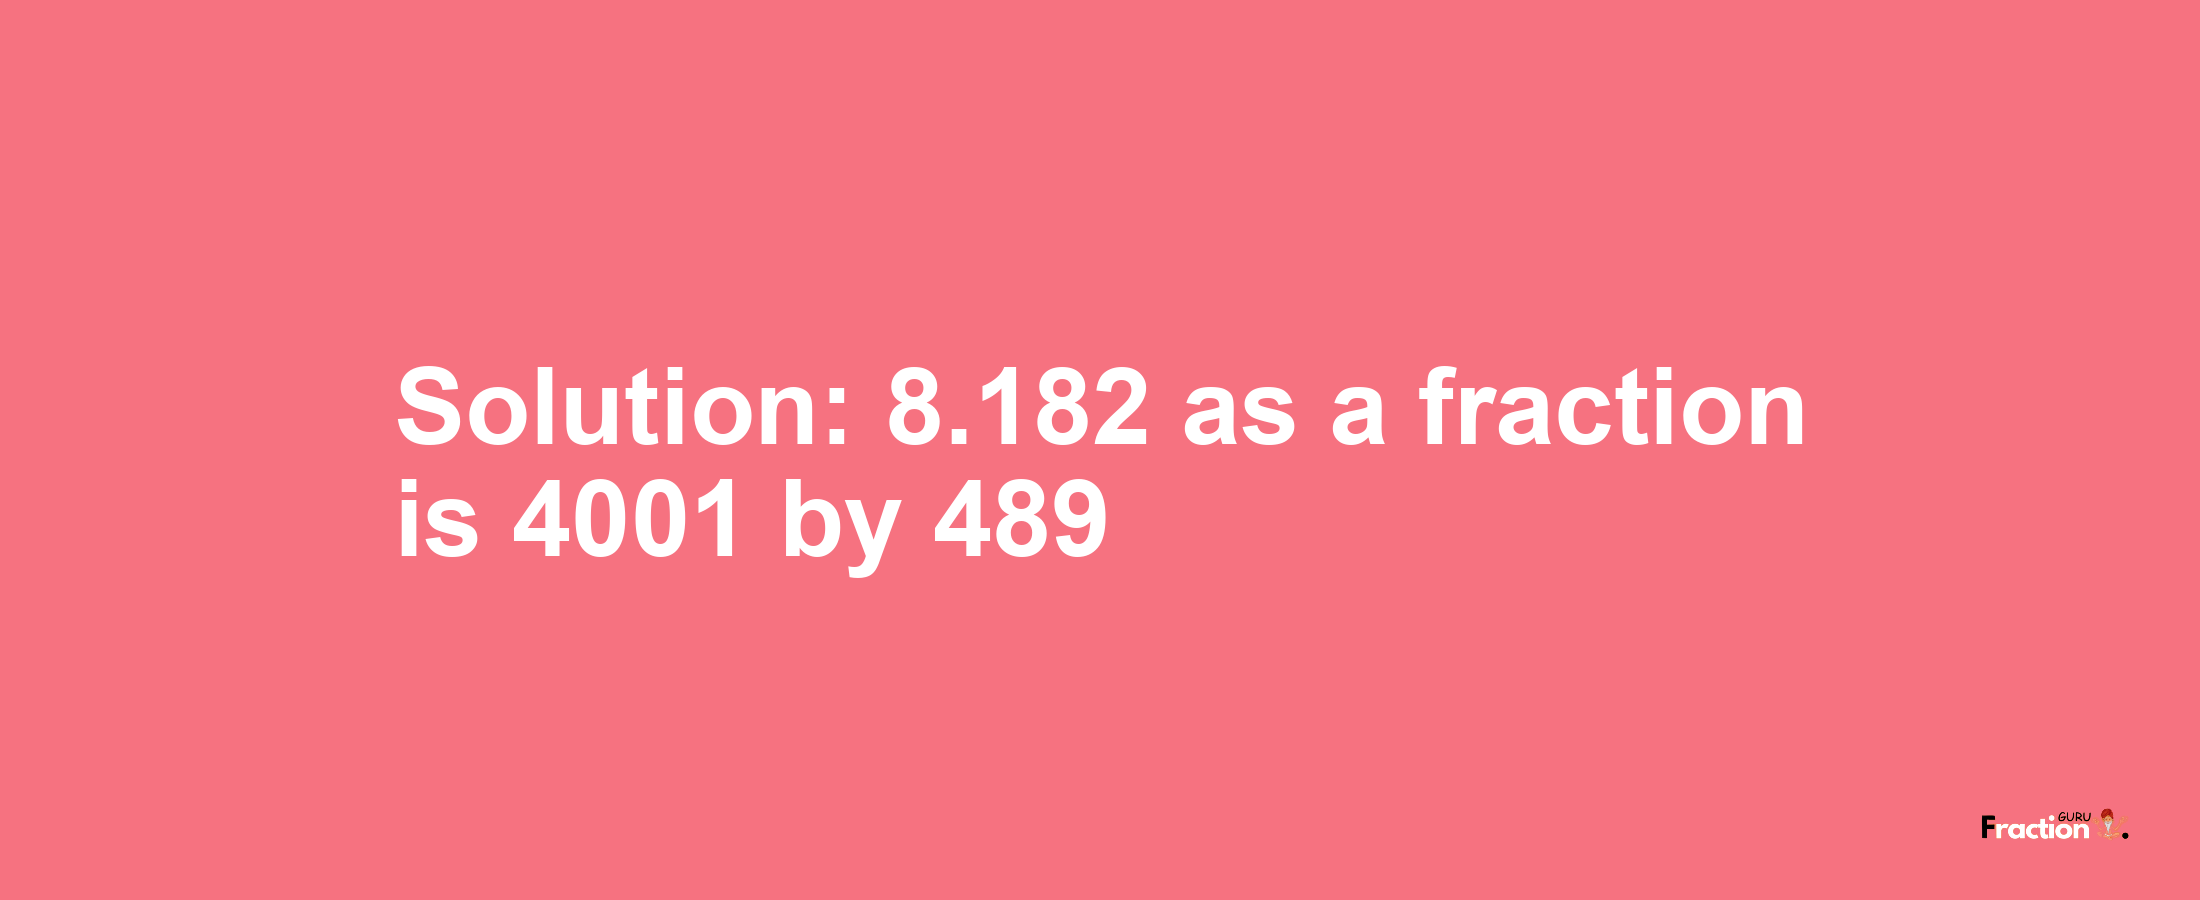 Solution:8.182 as a fraction is 4001/489